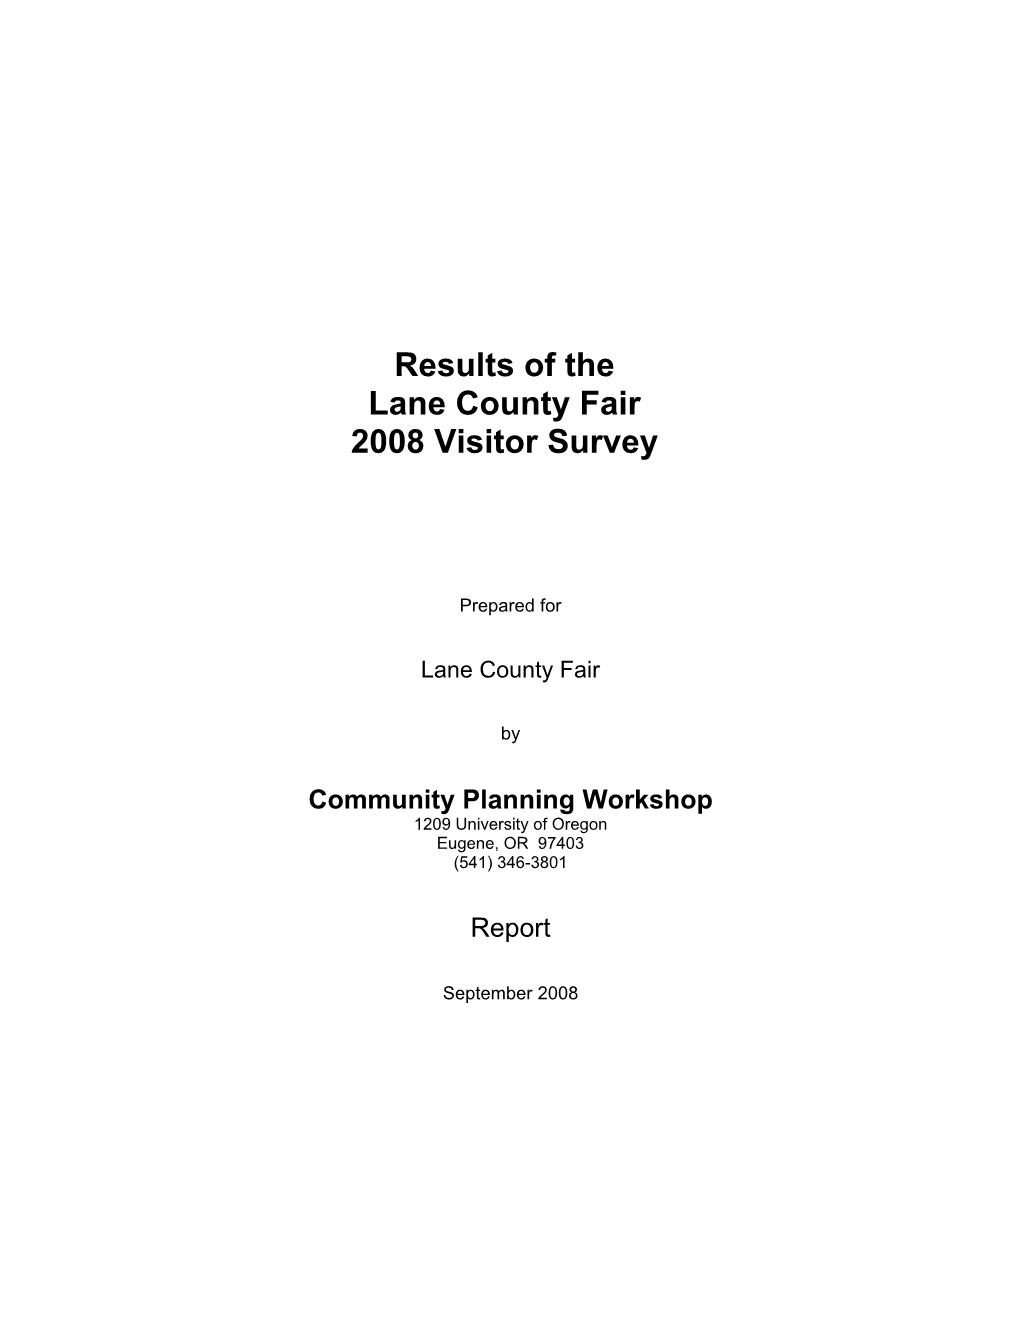 Results of the Lane County Fair 2008 Visitor Survey